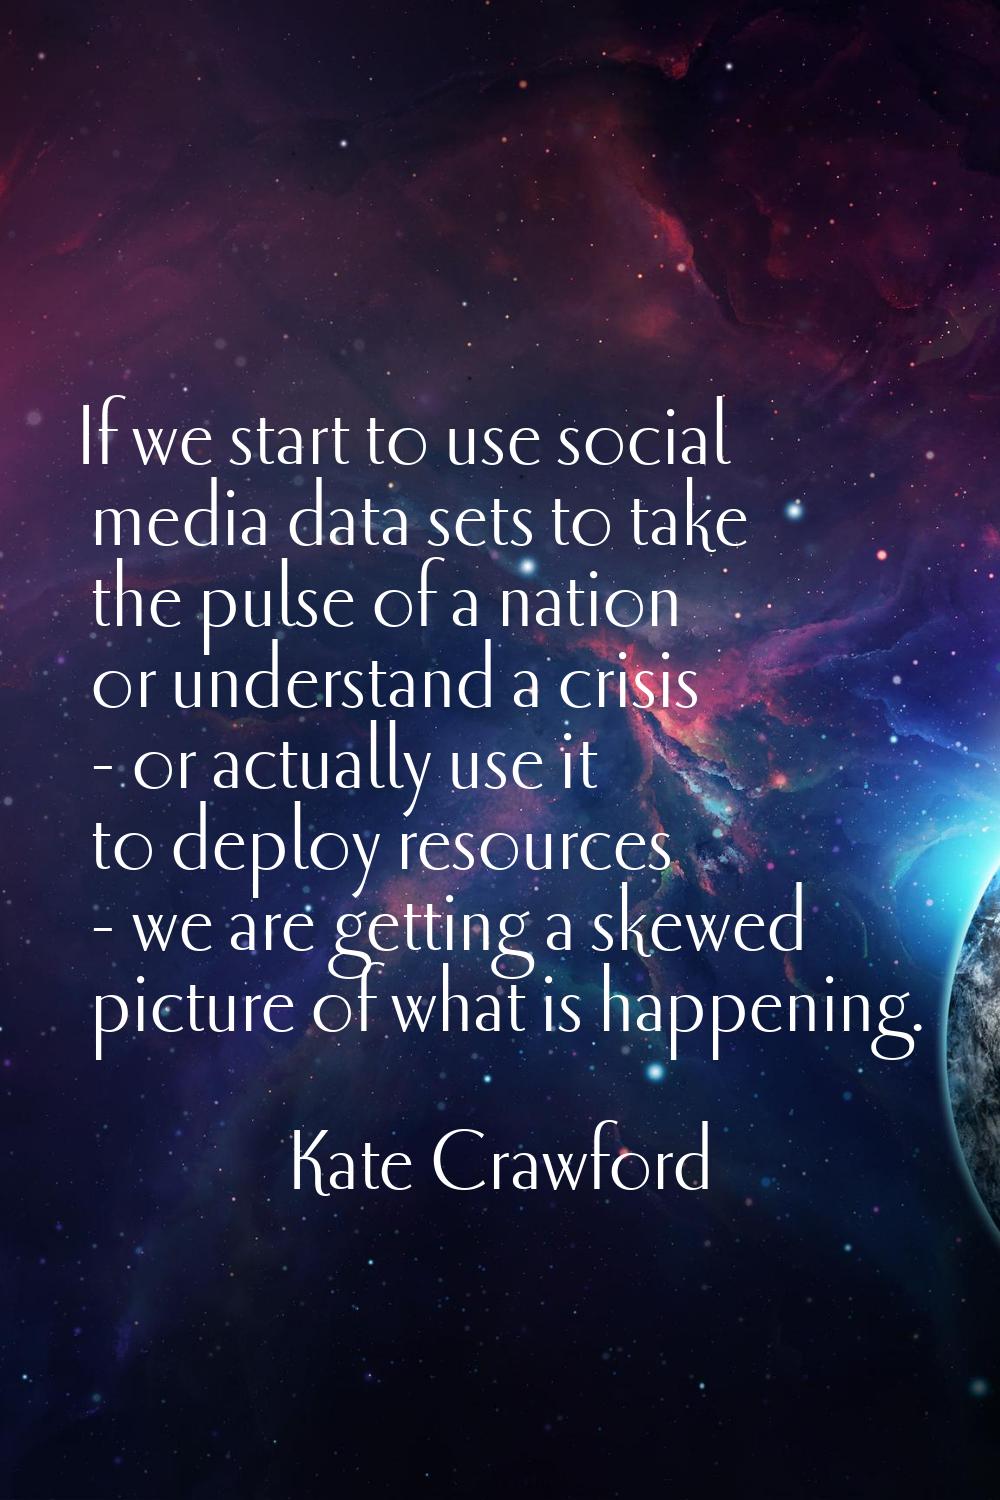 If we start to use social media data sets to take the pulse of a nation or understand a crisis - or